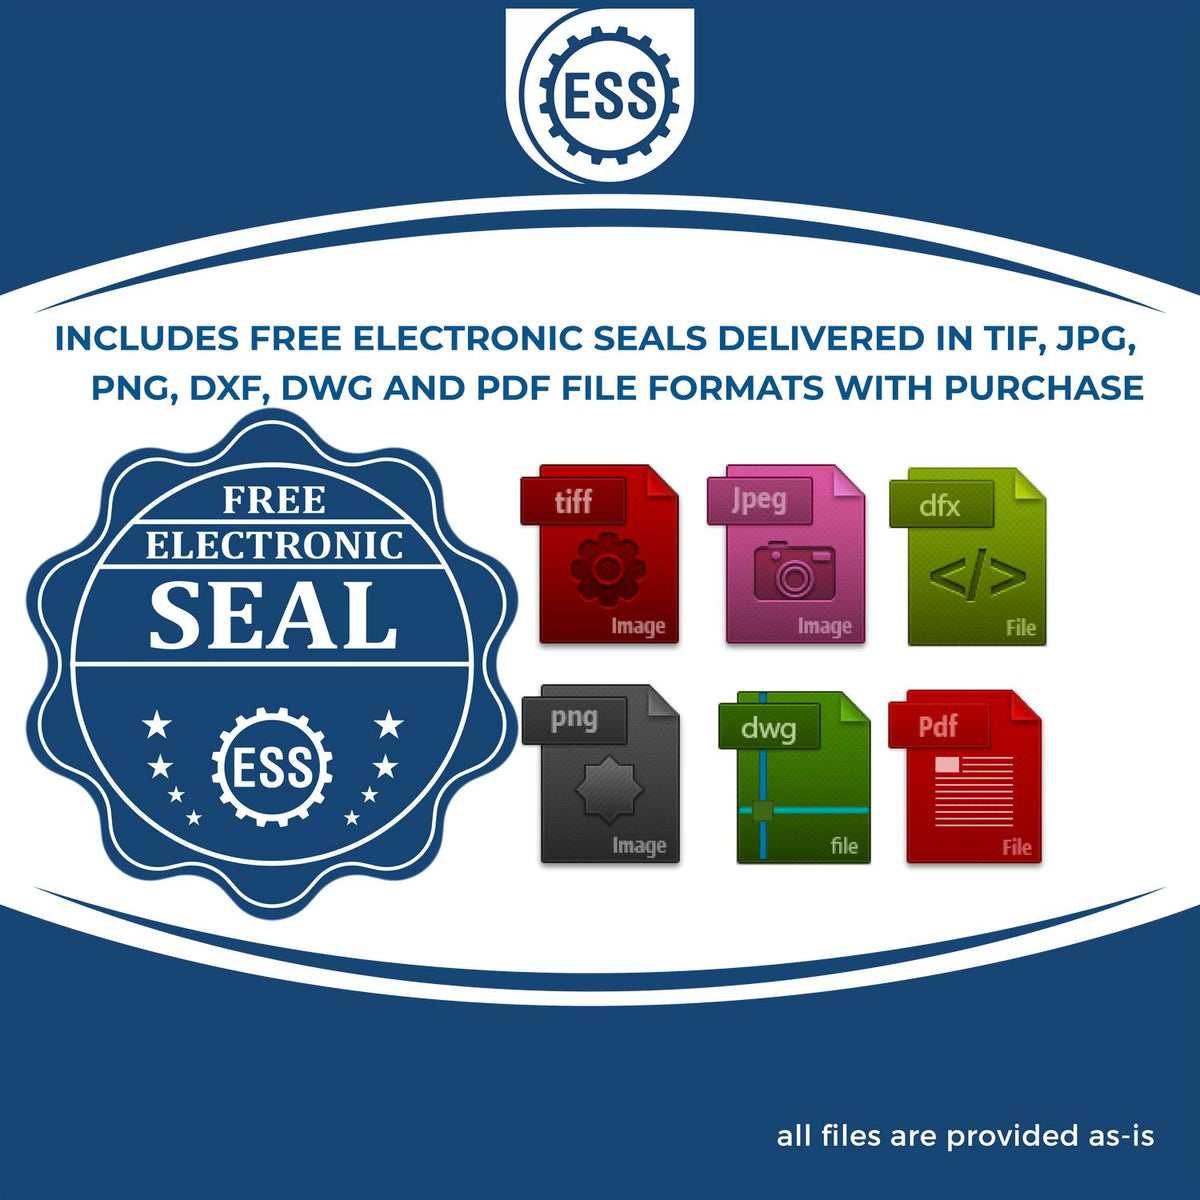 An infographic for the free electronic seal for the Soft Hawaii Professional Engineer Seal illustrating the different file type icons such as DXF, DWG, TIF, JPG and PNG.